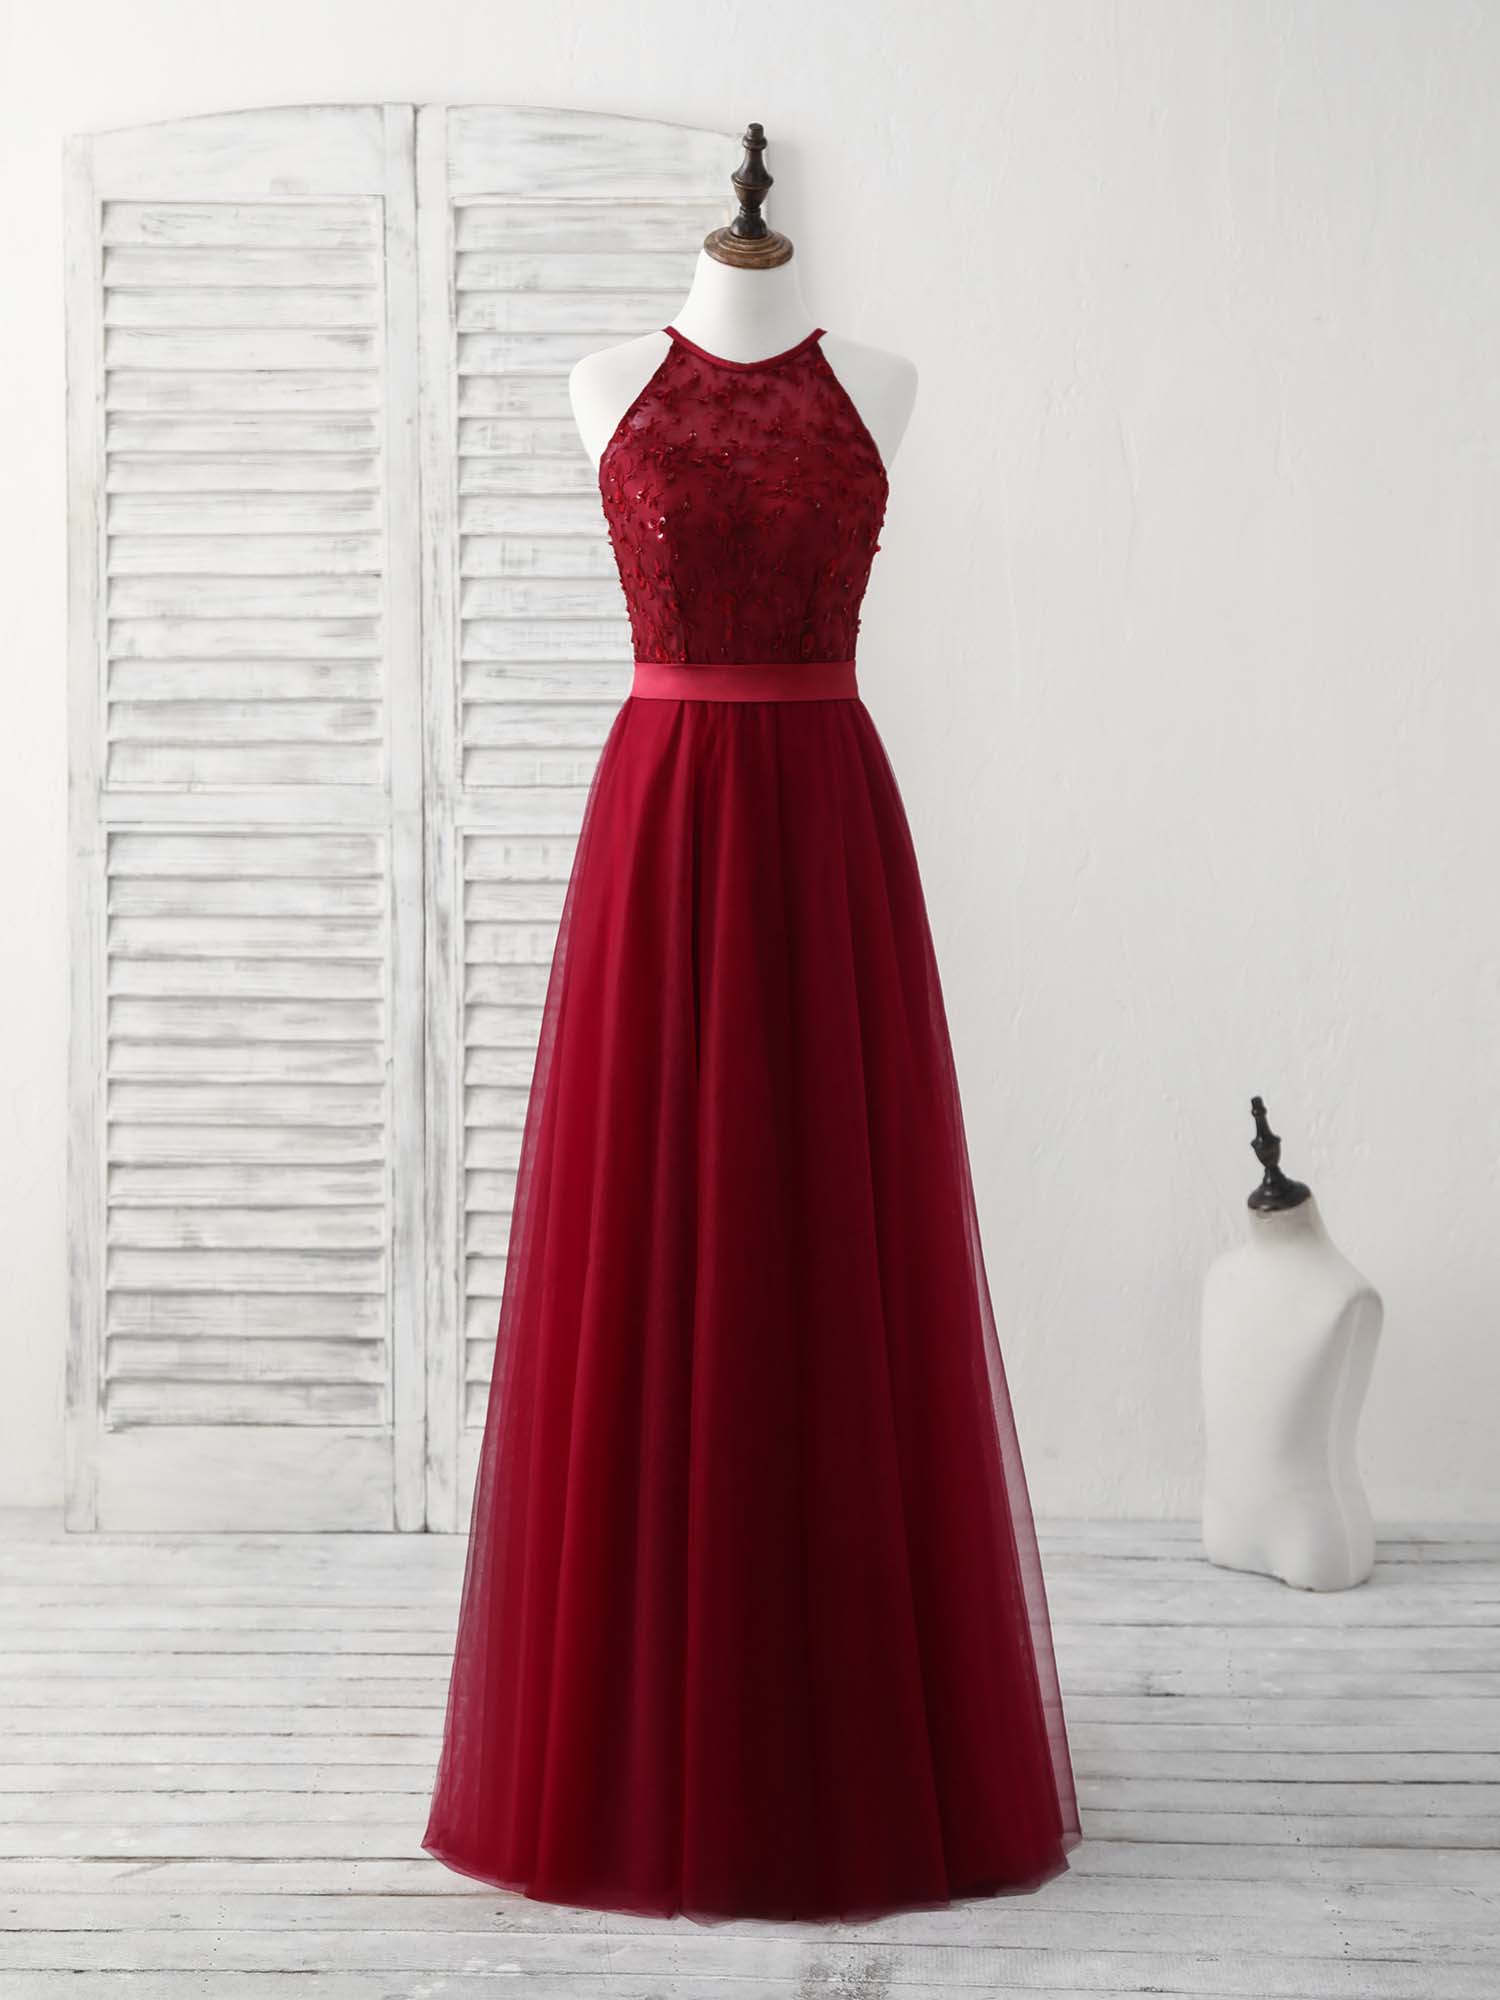 Burgundy Tulle Lace Long Corset Prom Dress, Burgundy Corset Bridesmaid Dress outfit, Party Dresses And Tops